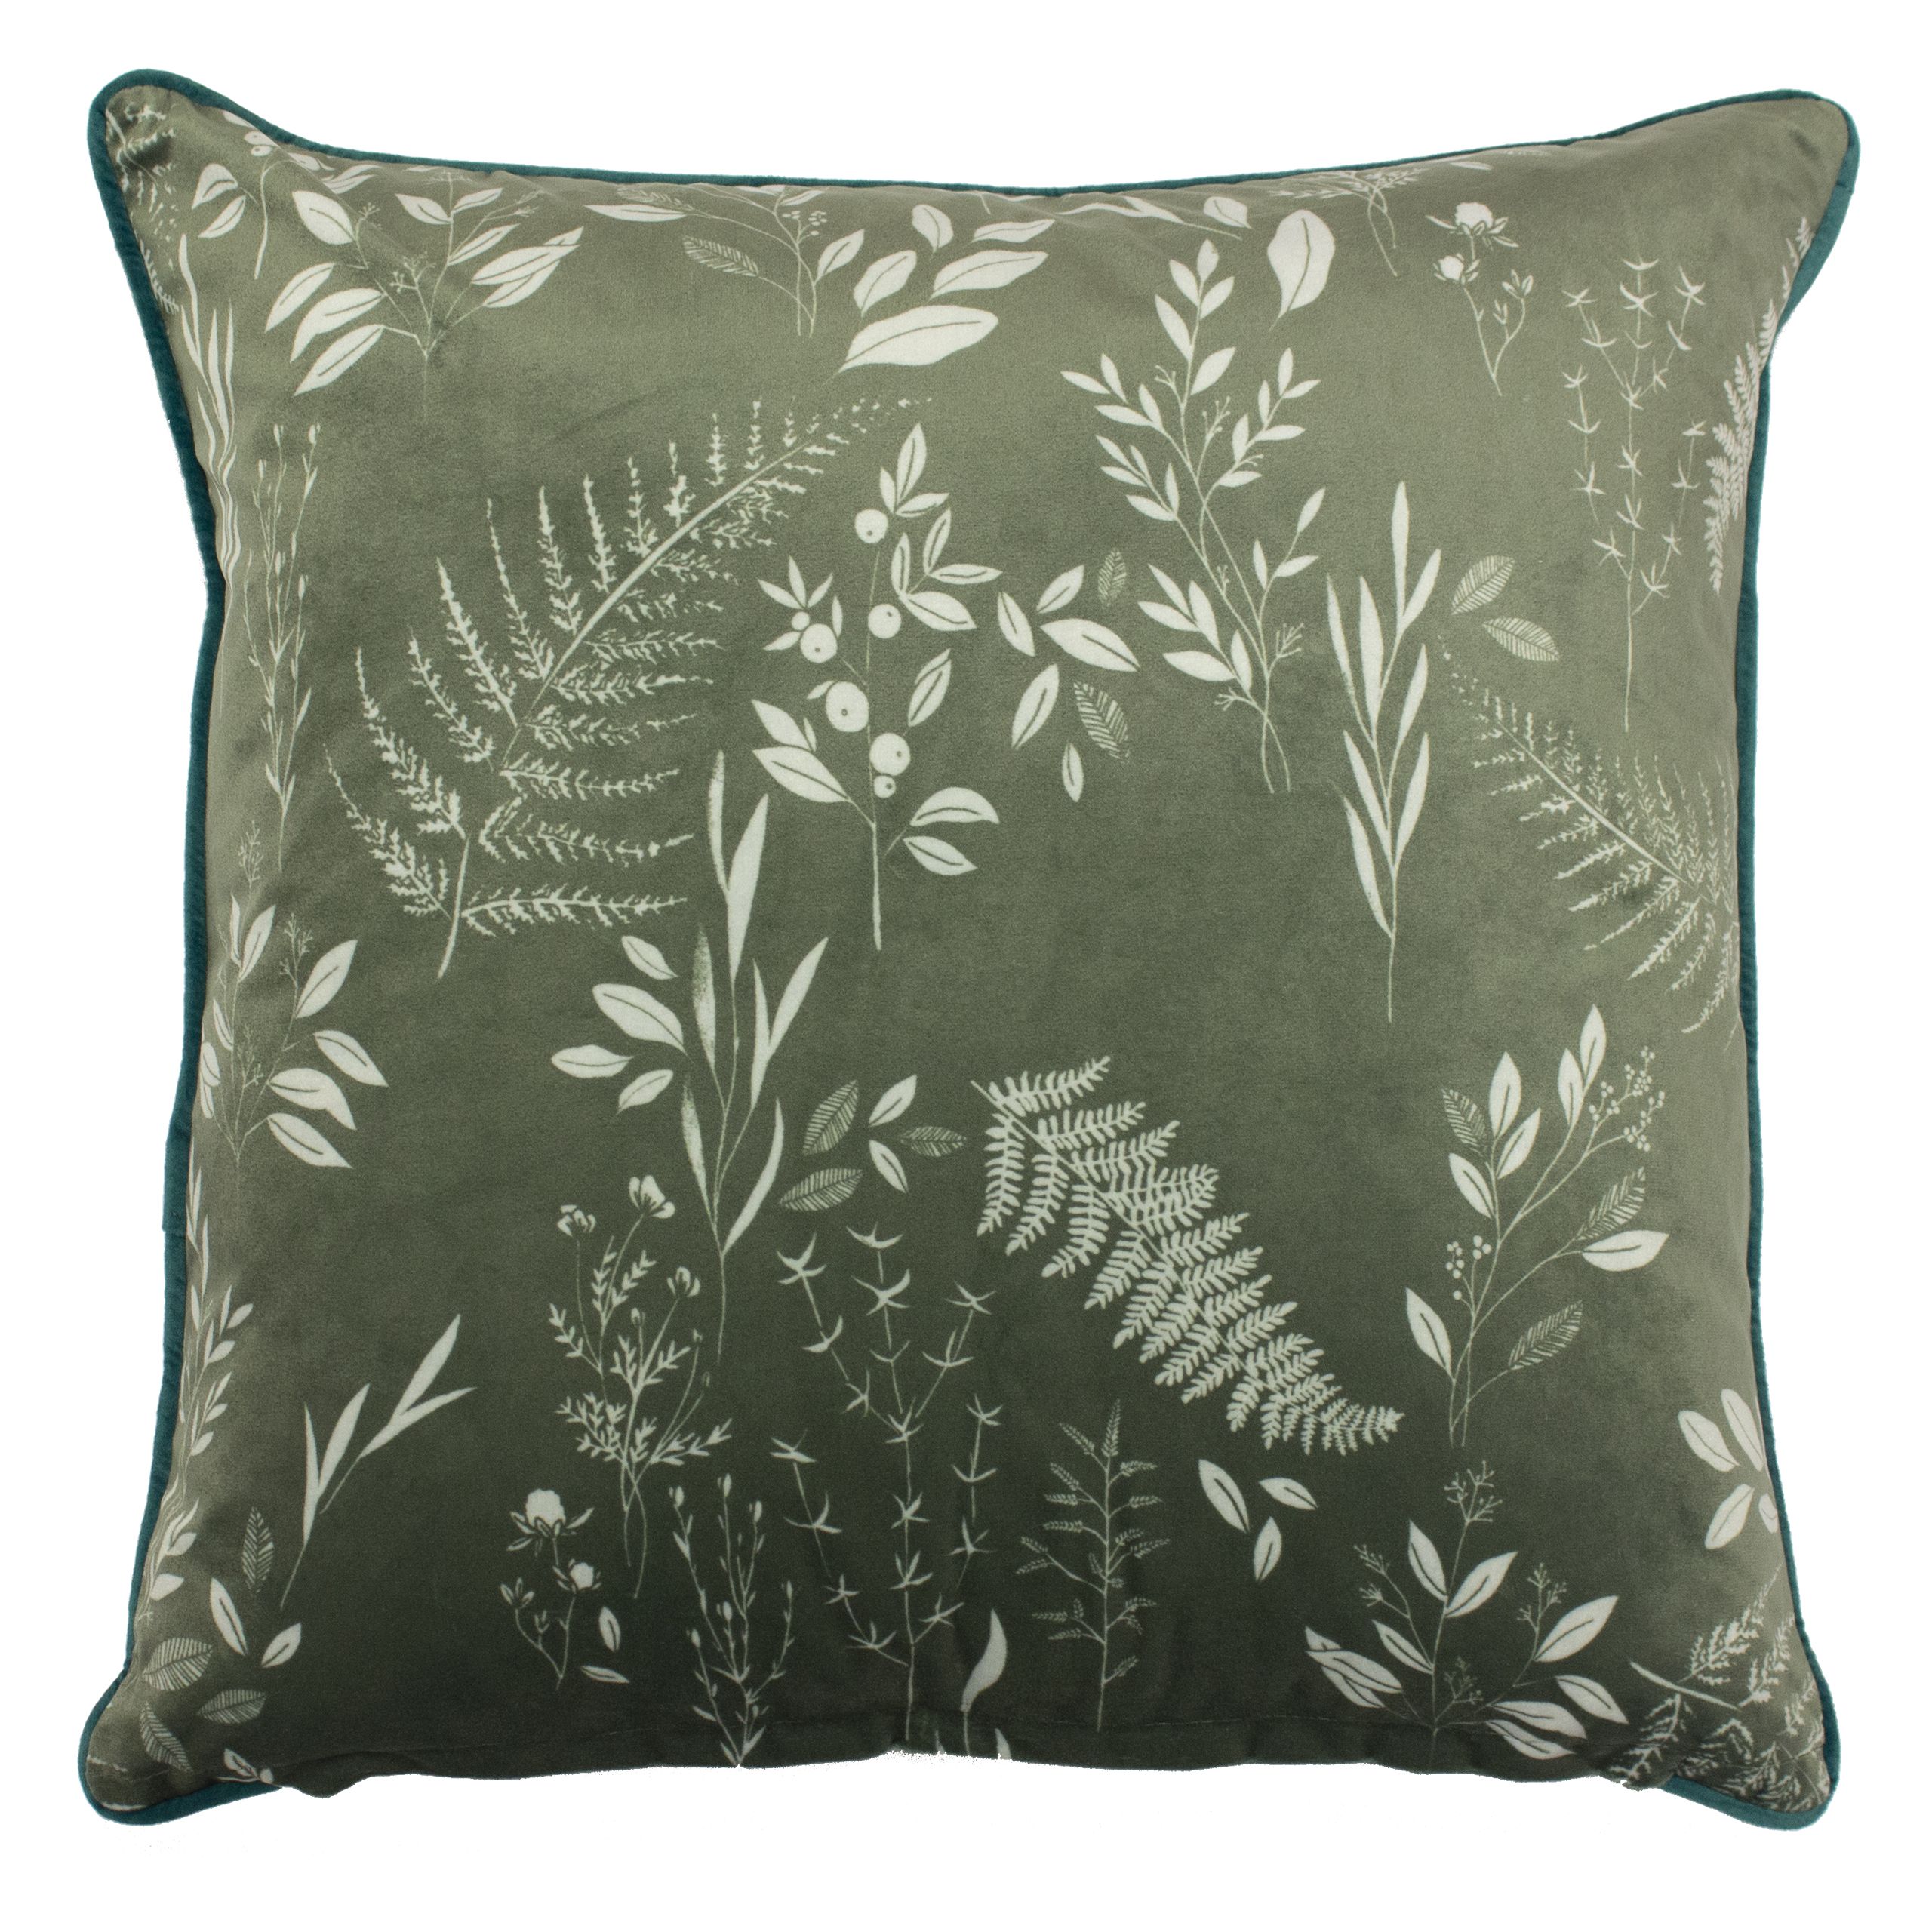 Add a burst of Botanics to your interior with this printed cushion, designed to epitomise the concept of the outdoors being combined within the interiors of the home. This multi-seasonal cushion has a classic botanical print design with a rich earth-toned colourway and contrasting piped edges. A bold botanical print can bring real character and personality to your interior alongside helping you relax when cosying up to this soft, plush cushion.